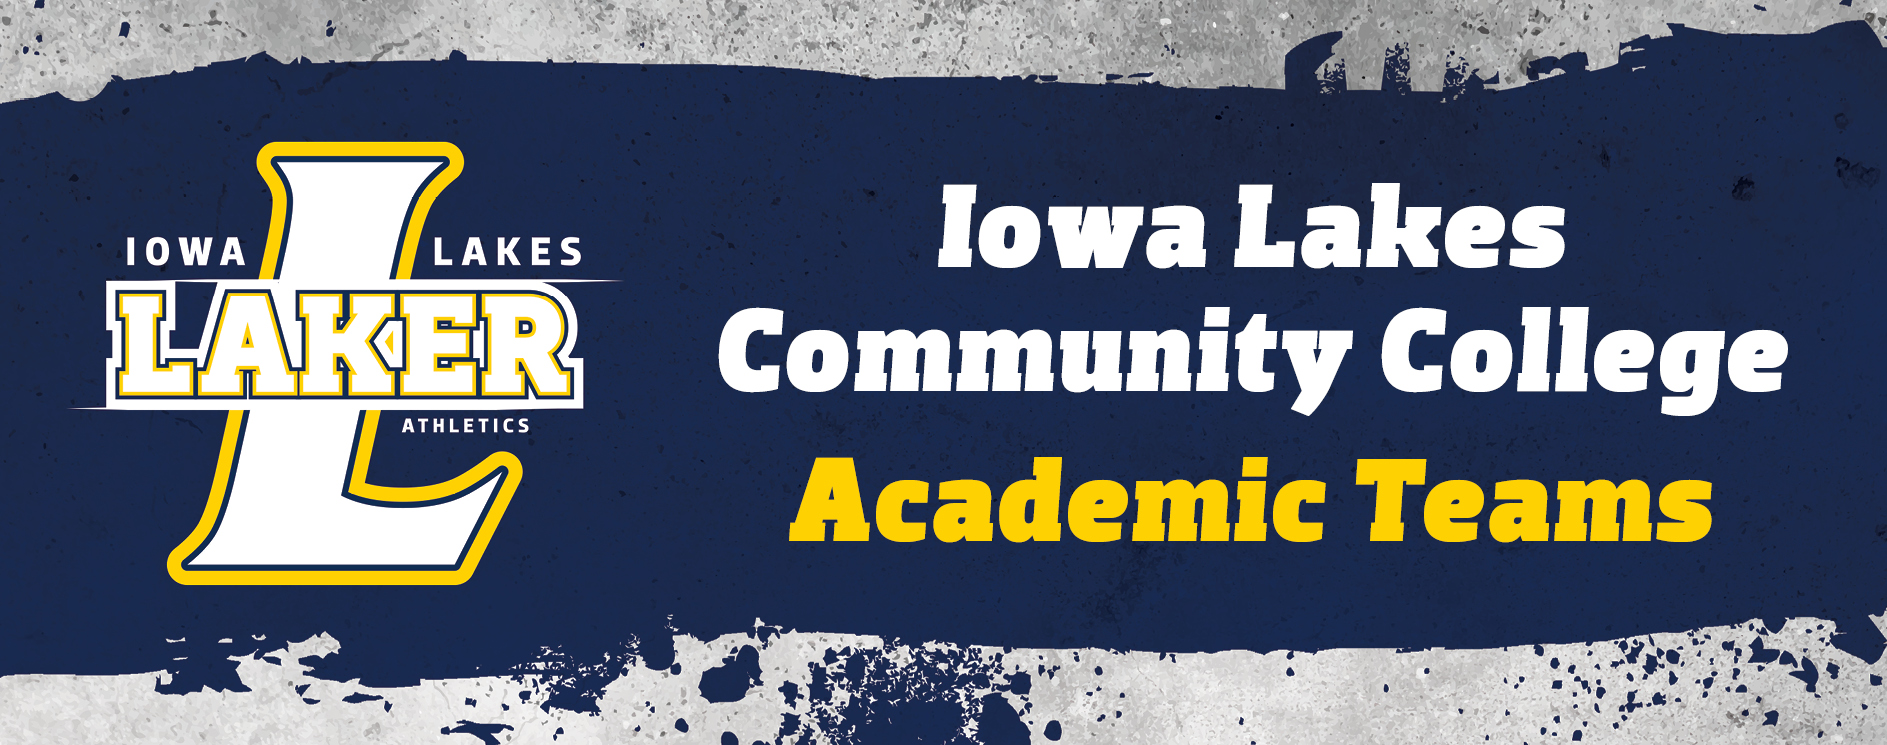 Iowa Lakes Student Athletes Earn Academic Recognition